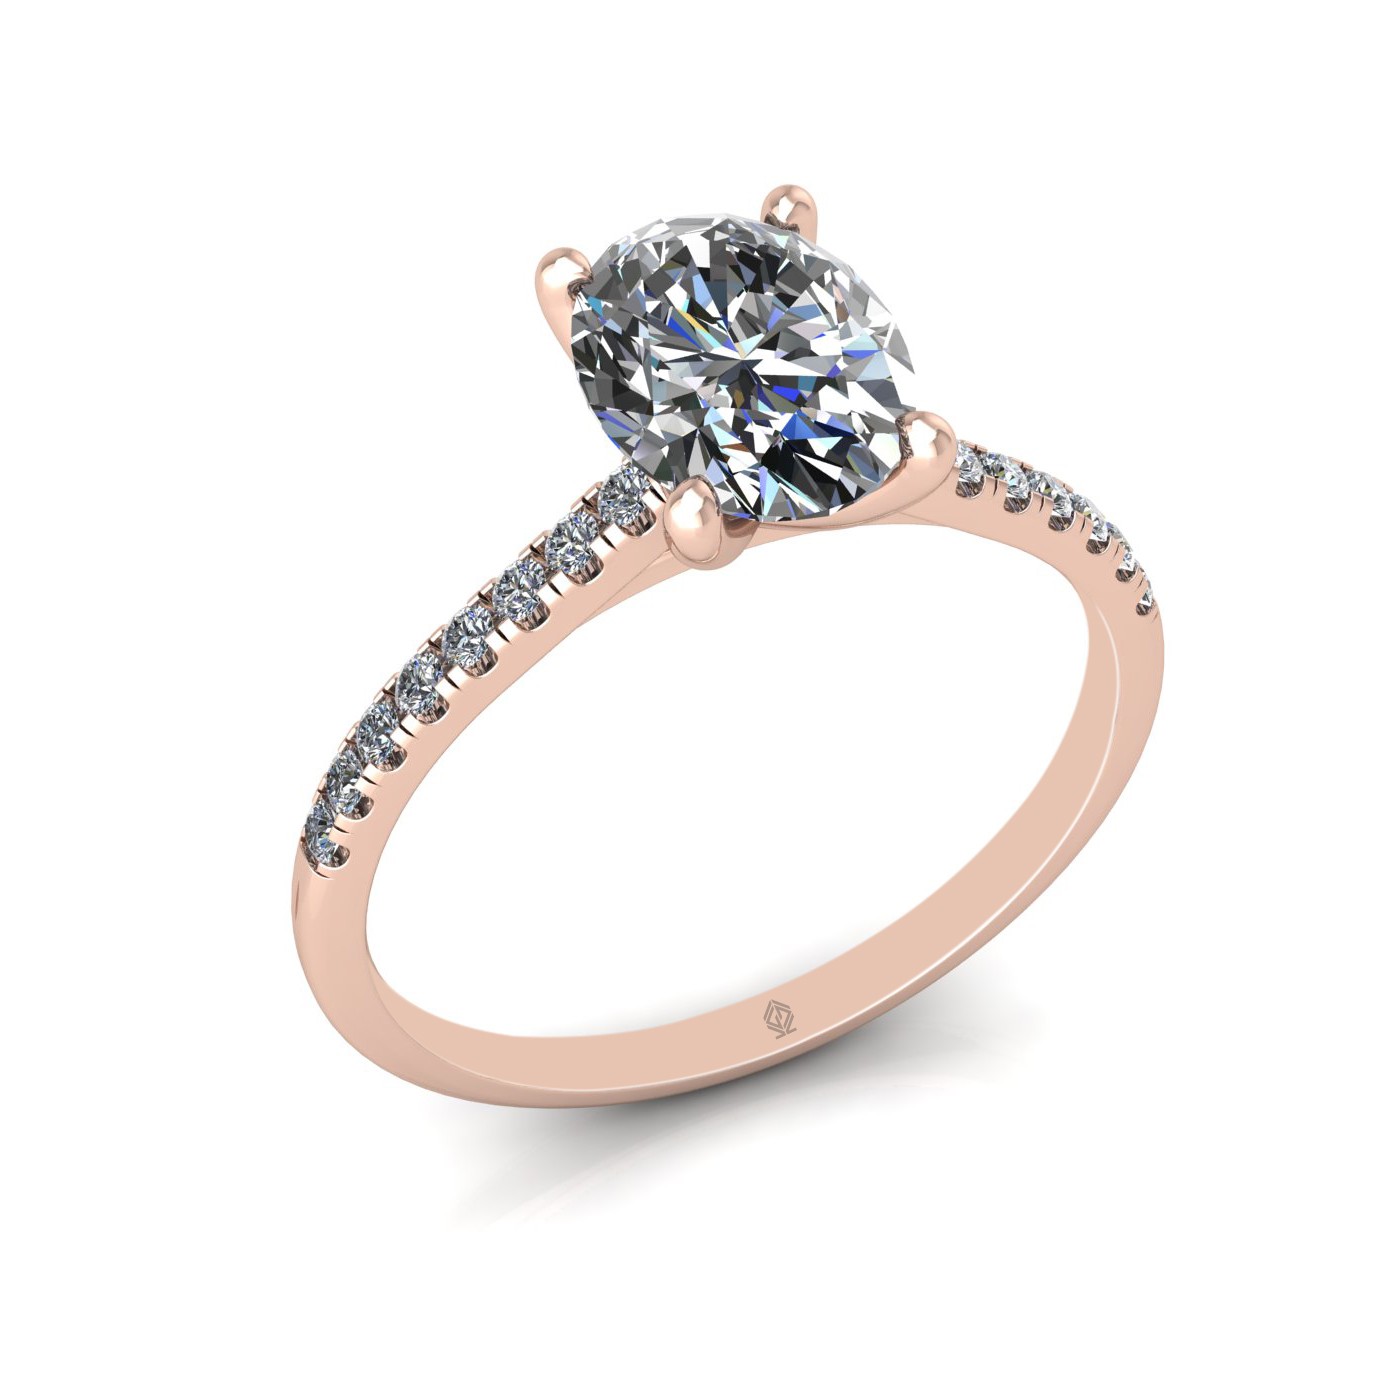 18k rose gold  1,20 ct 4 prongs oval cut diamond engagement ring with whisper thin pavÉ set band Photos & images